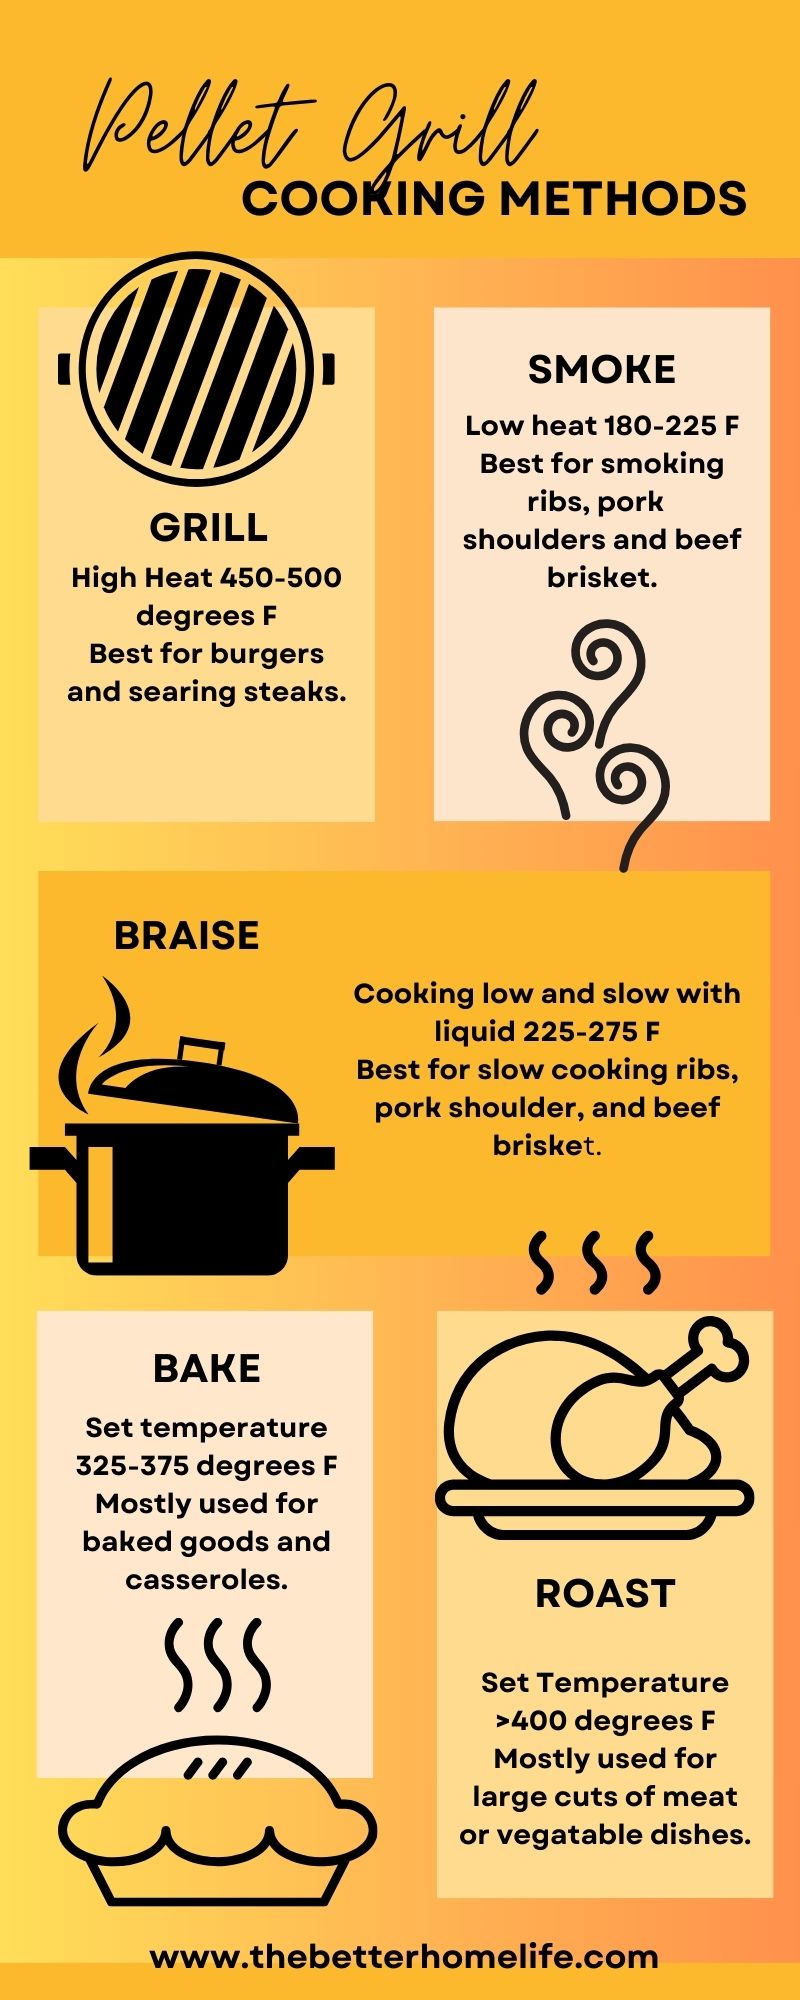 Pellet grill cooking methods infographic